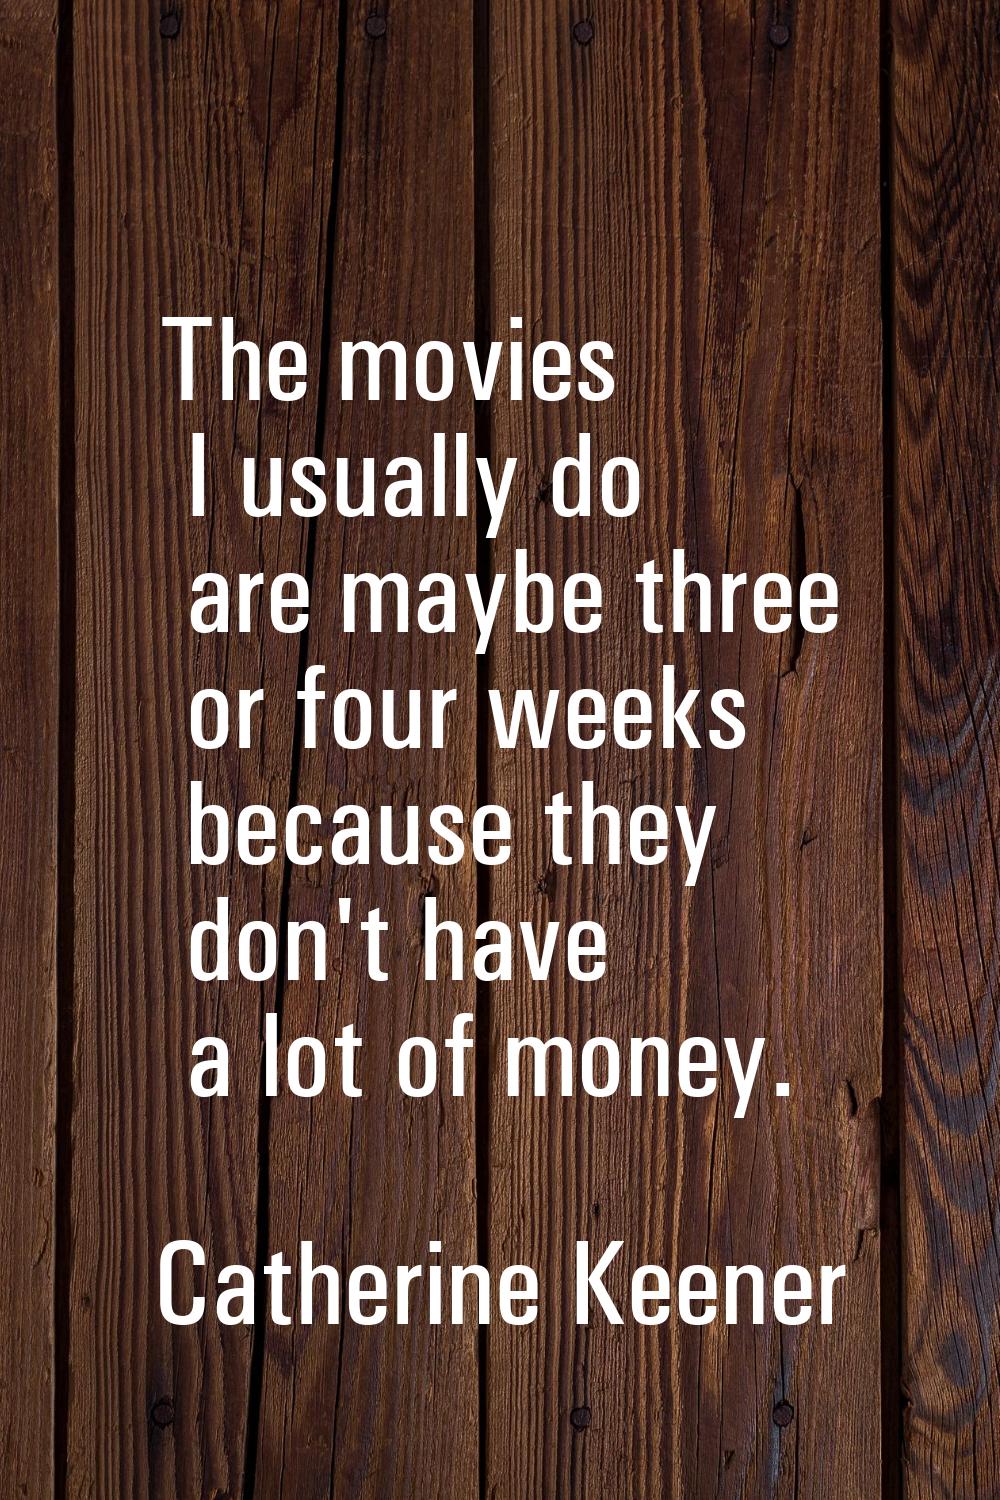 The movies I usually do are maybe three or four weeks because they don't have a lot of money.